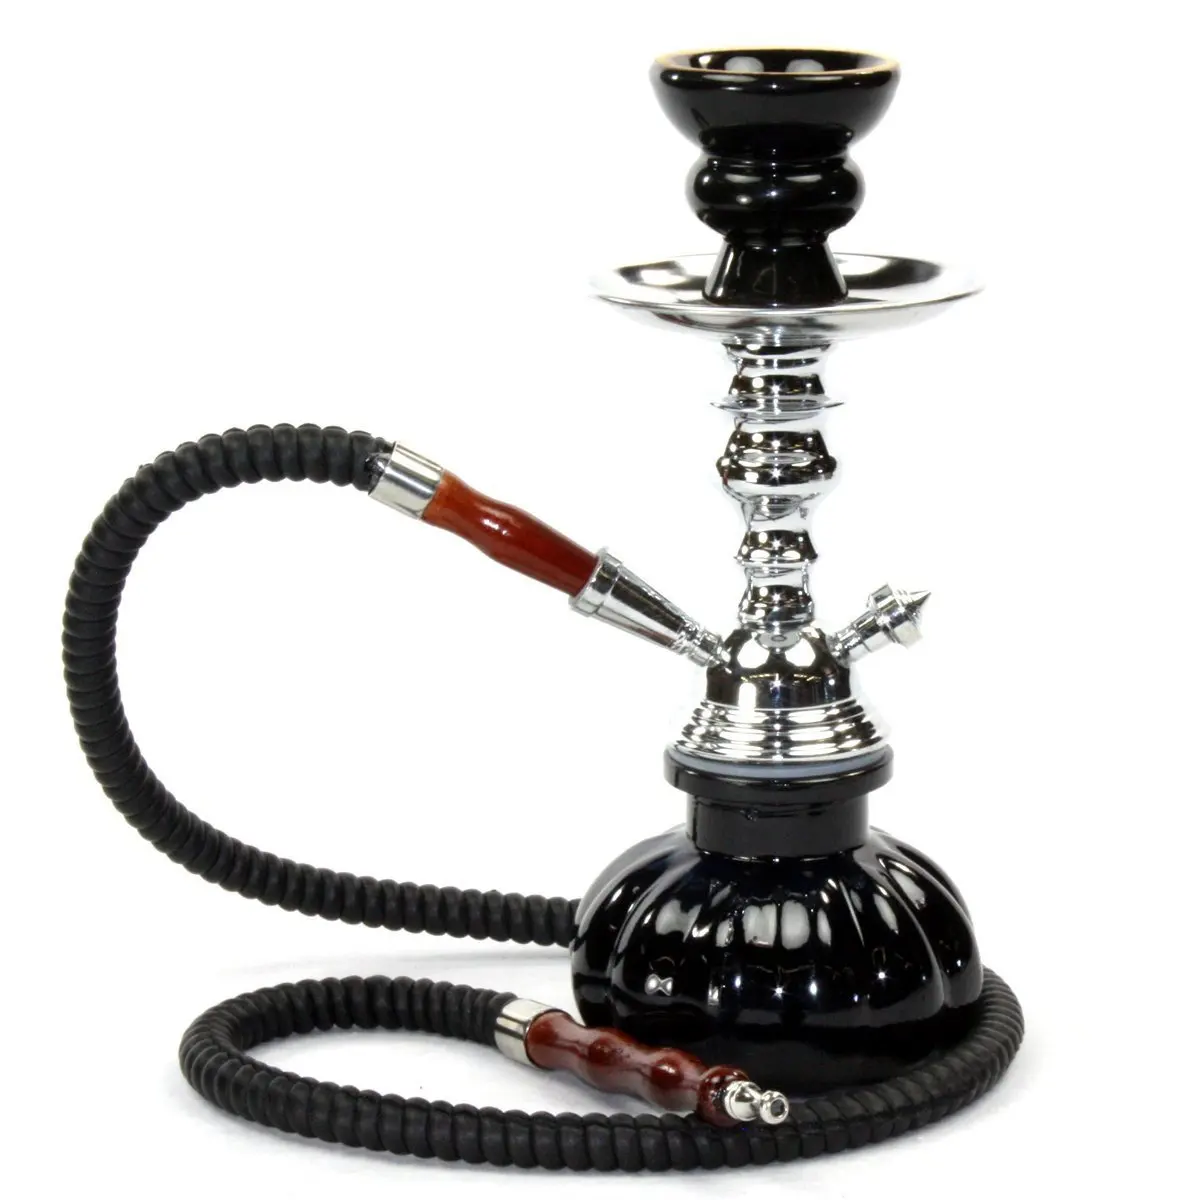 Some Important Things About Shisha